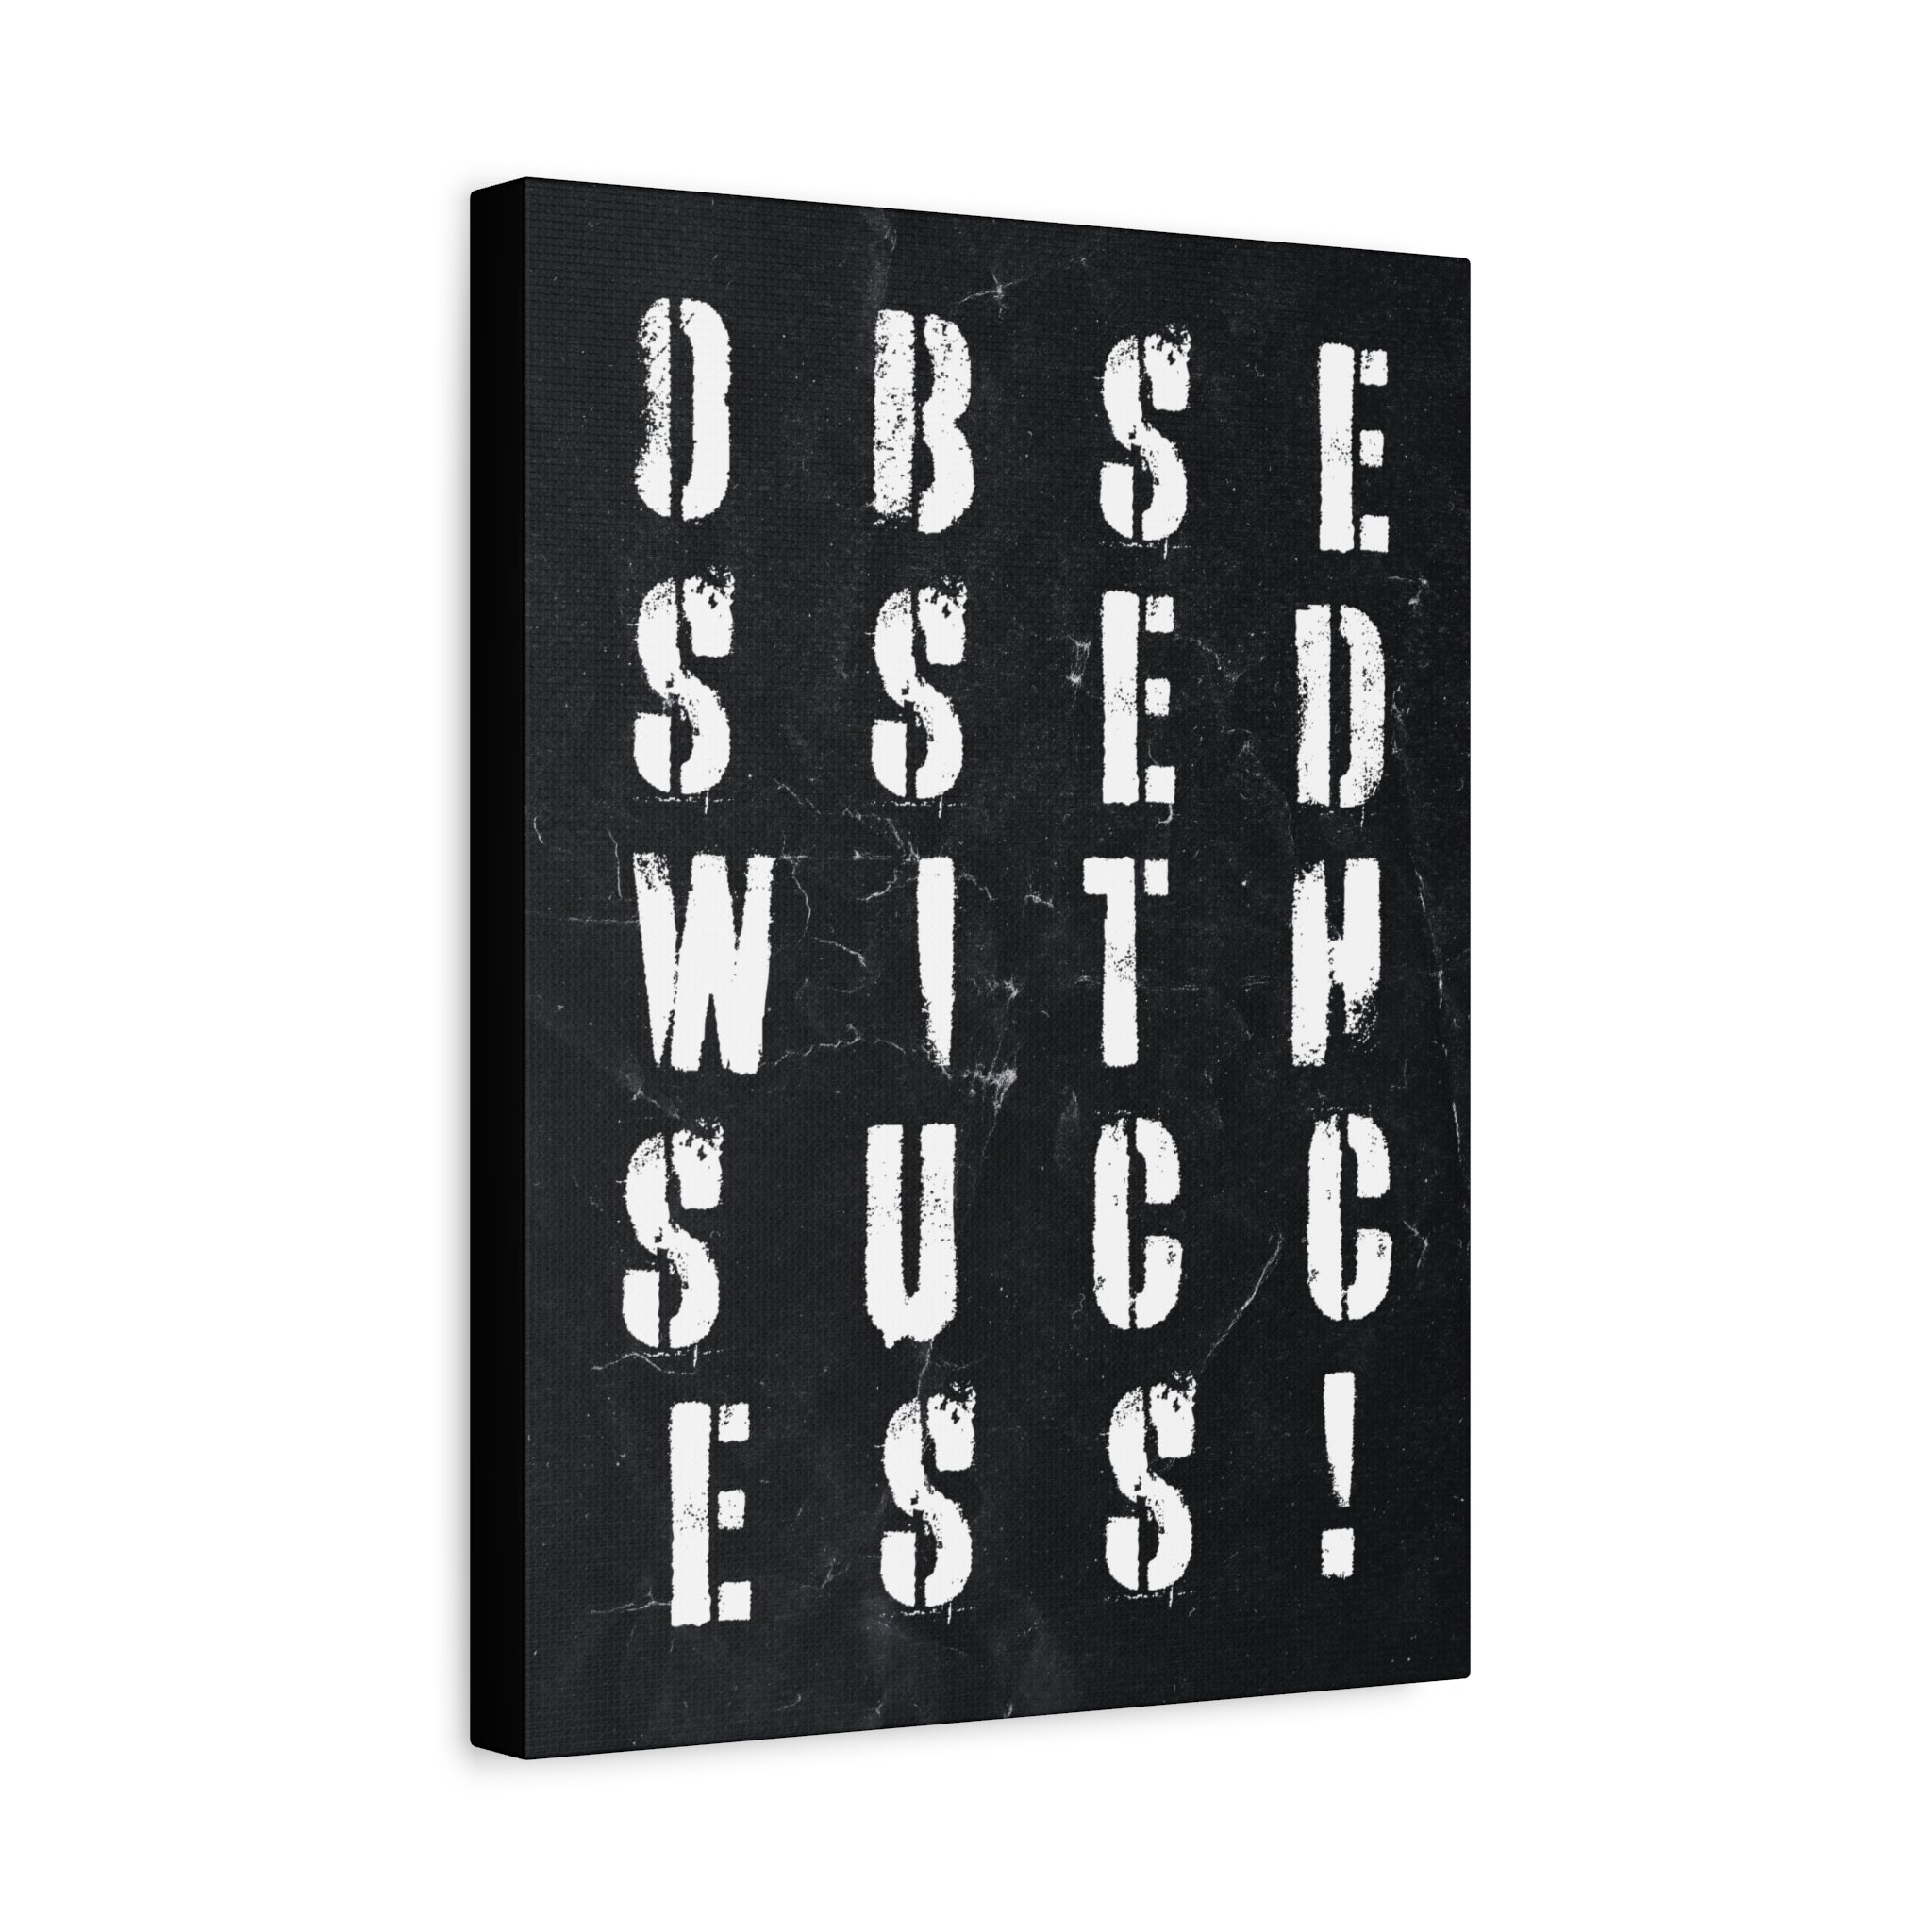 Obsessed With Success - Grid - Wall Art additional image 2